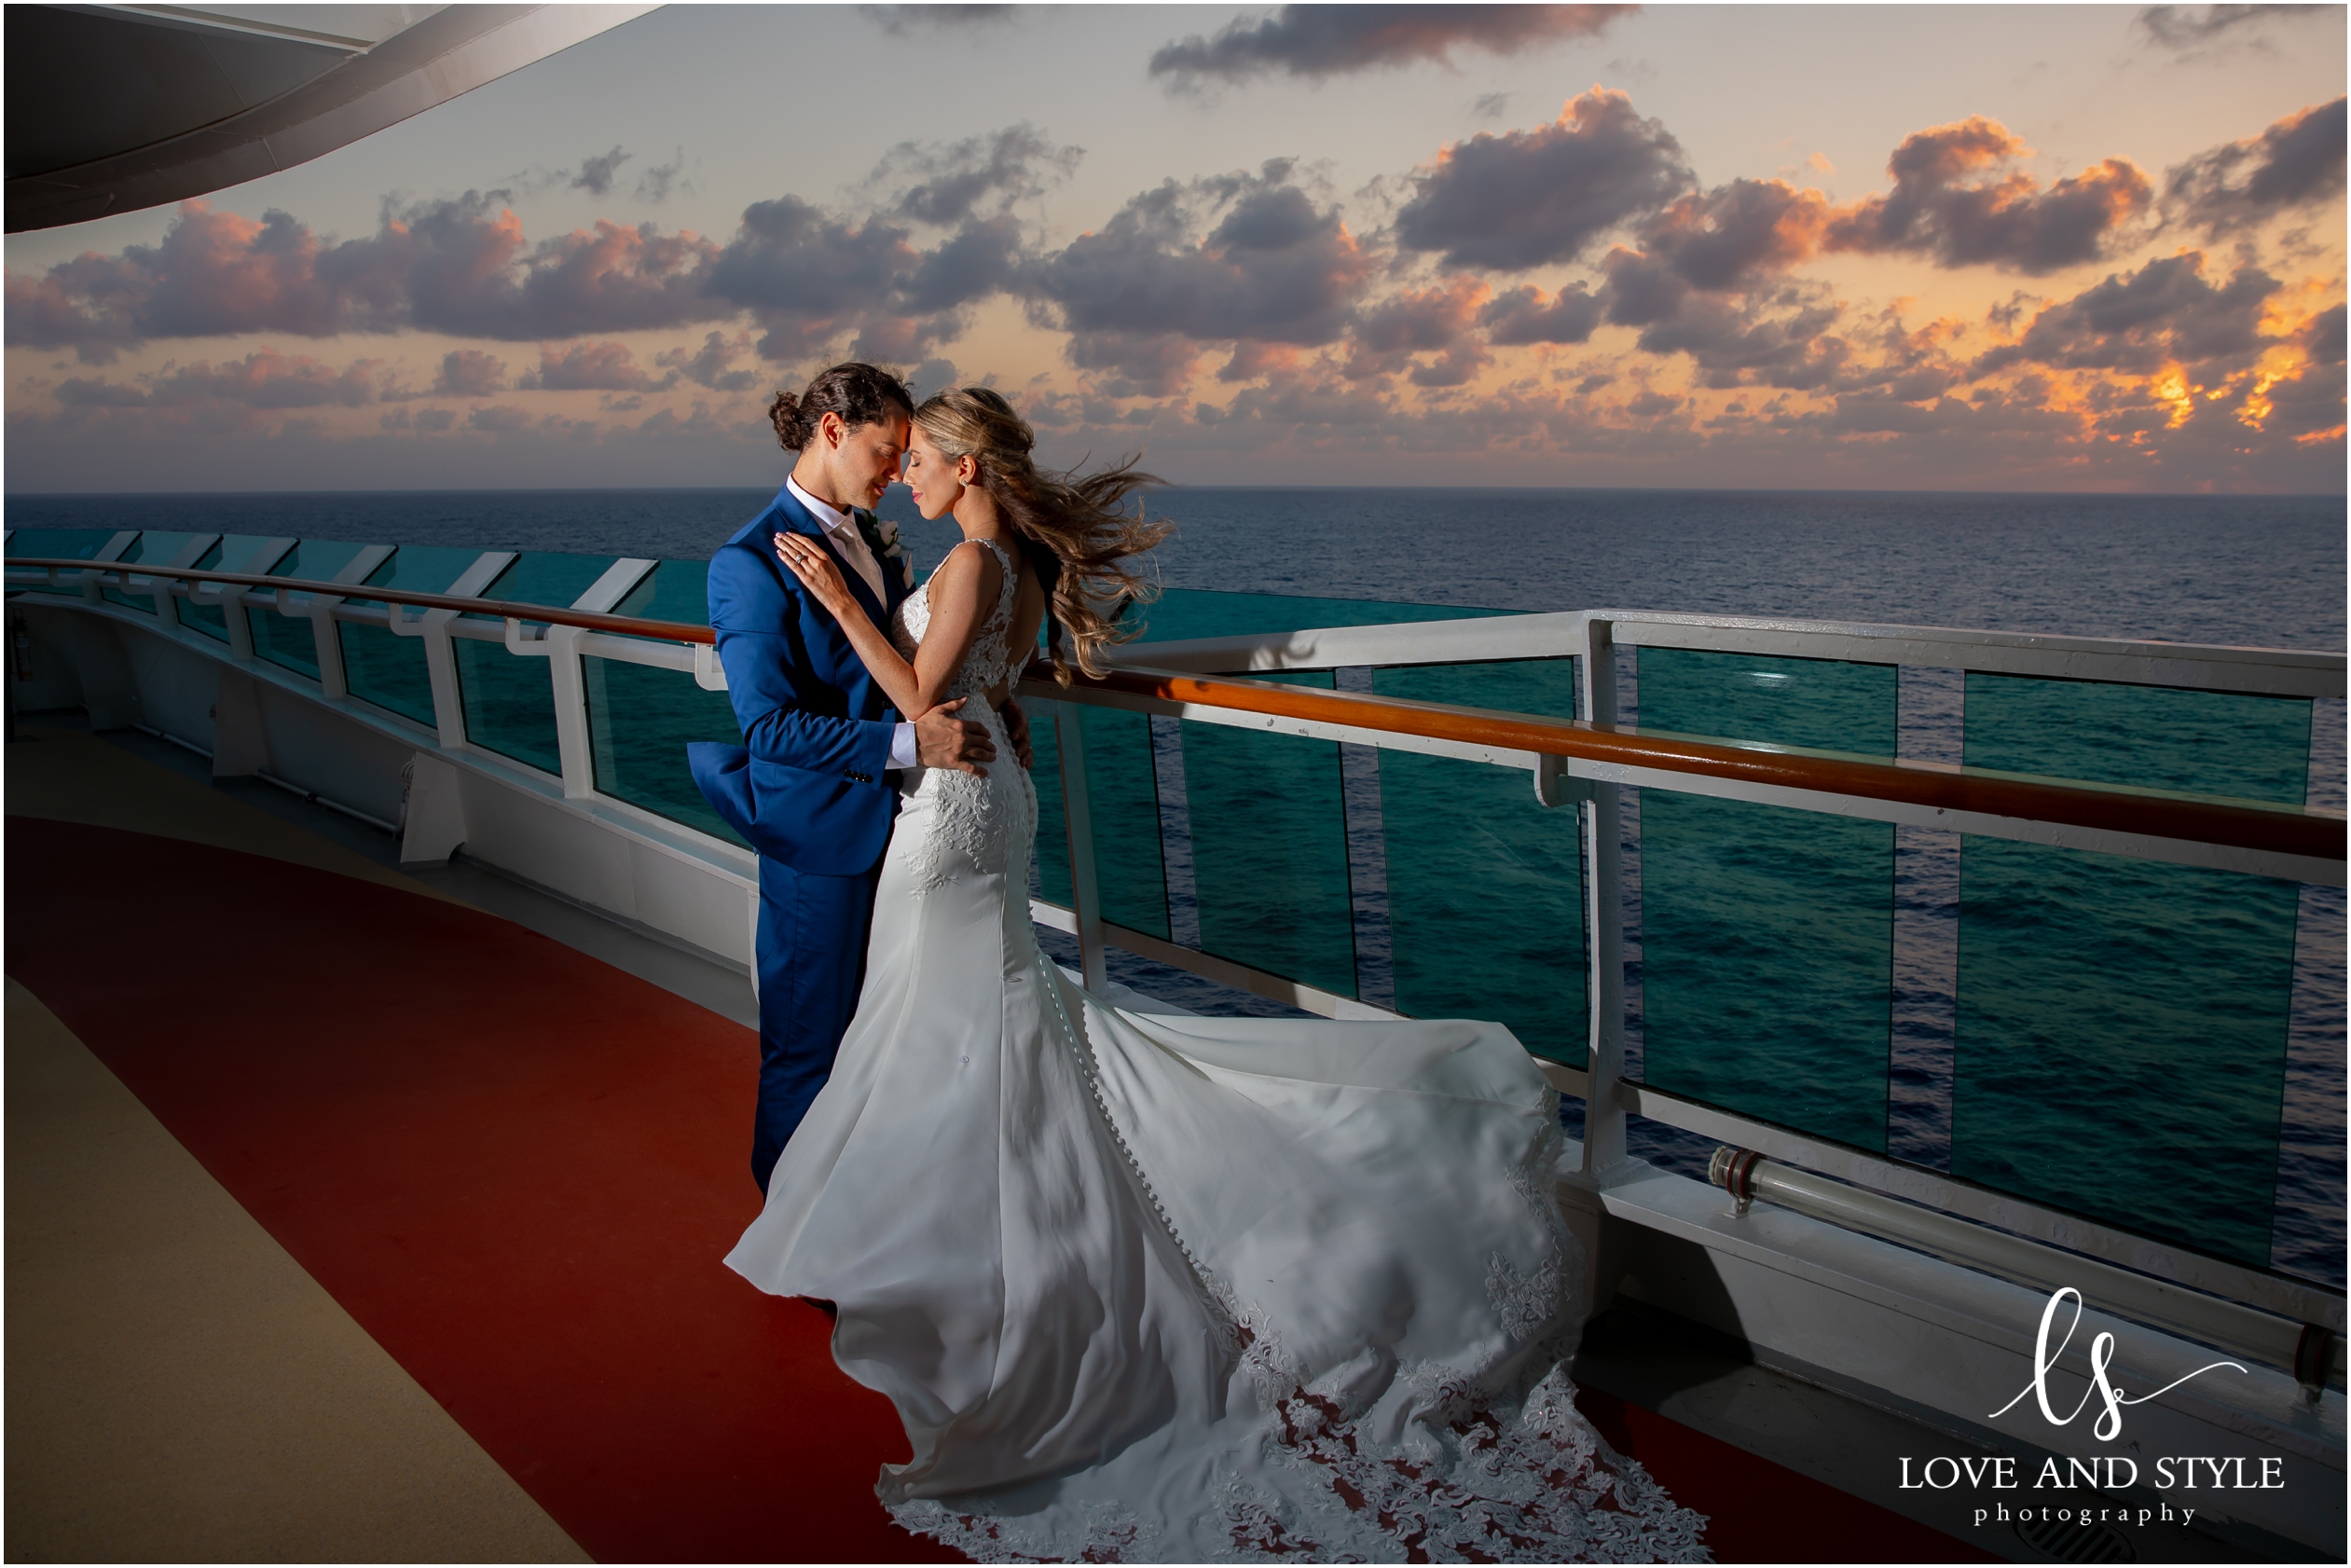 Daisy and Nenad's cruise ship wedding, bride and groom in the solarium, bride and groom on the deck at sunset